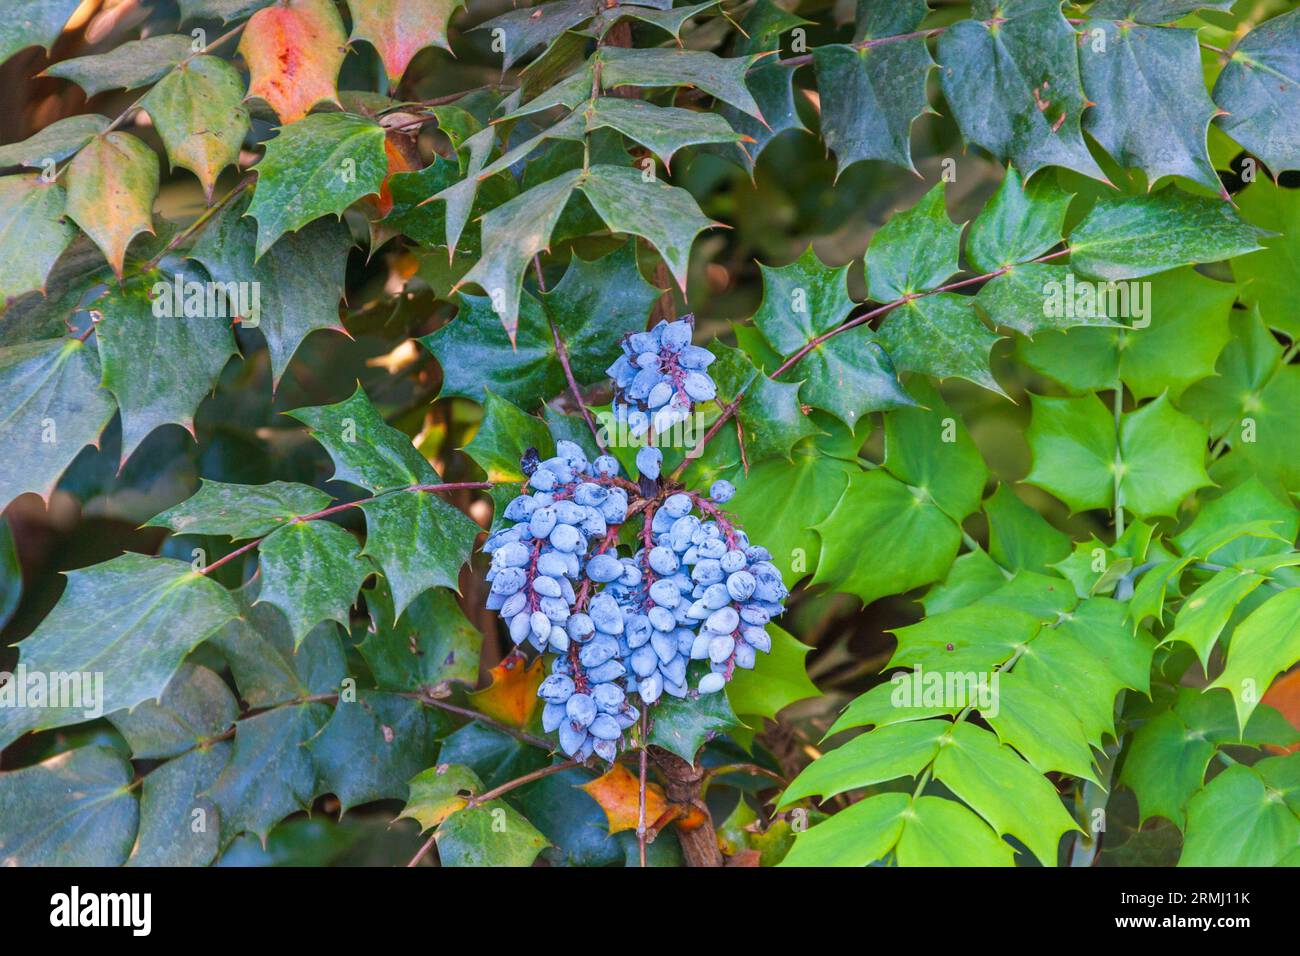 Leatherleaf Mahonia, Mahonia bealei, with blue berries, at Bellingrath Gardens near Moblie, Alabama in early spring. Stock Photo